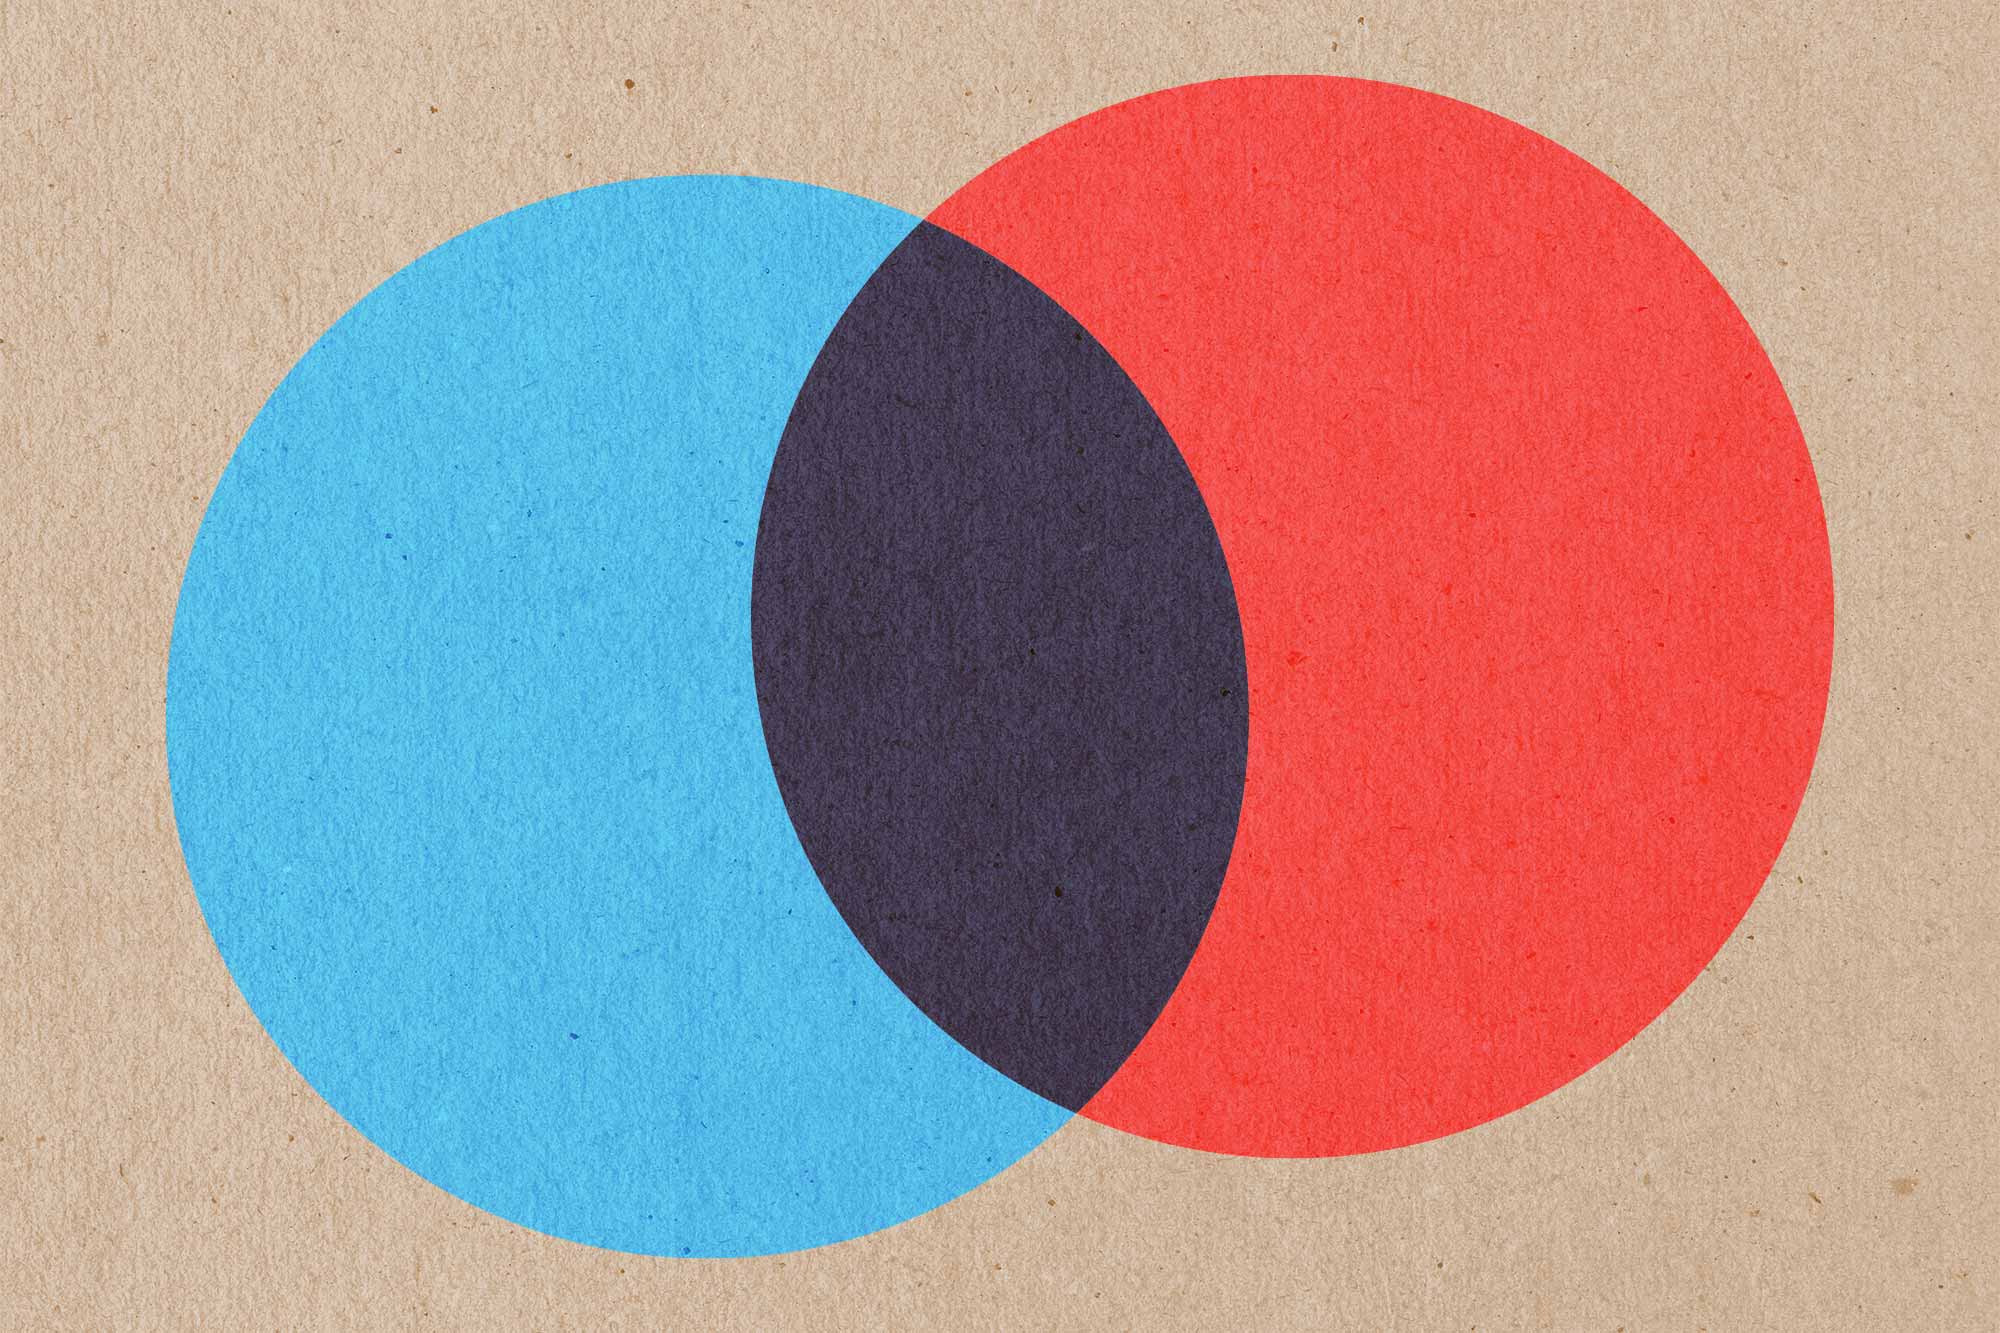 Two circles partially overlapping